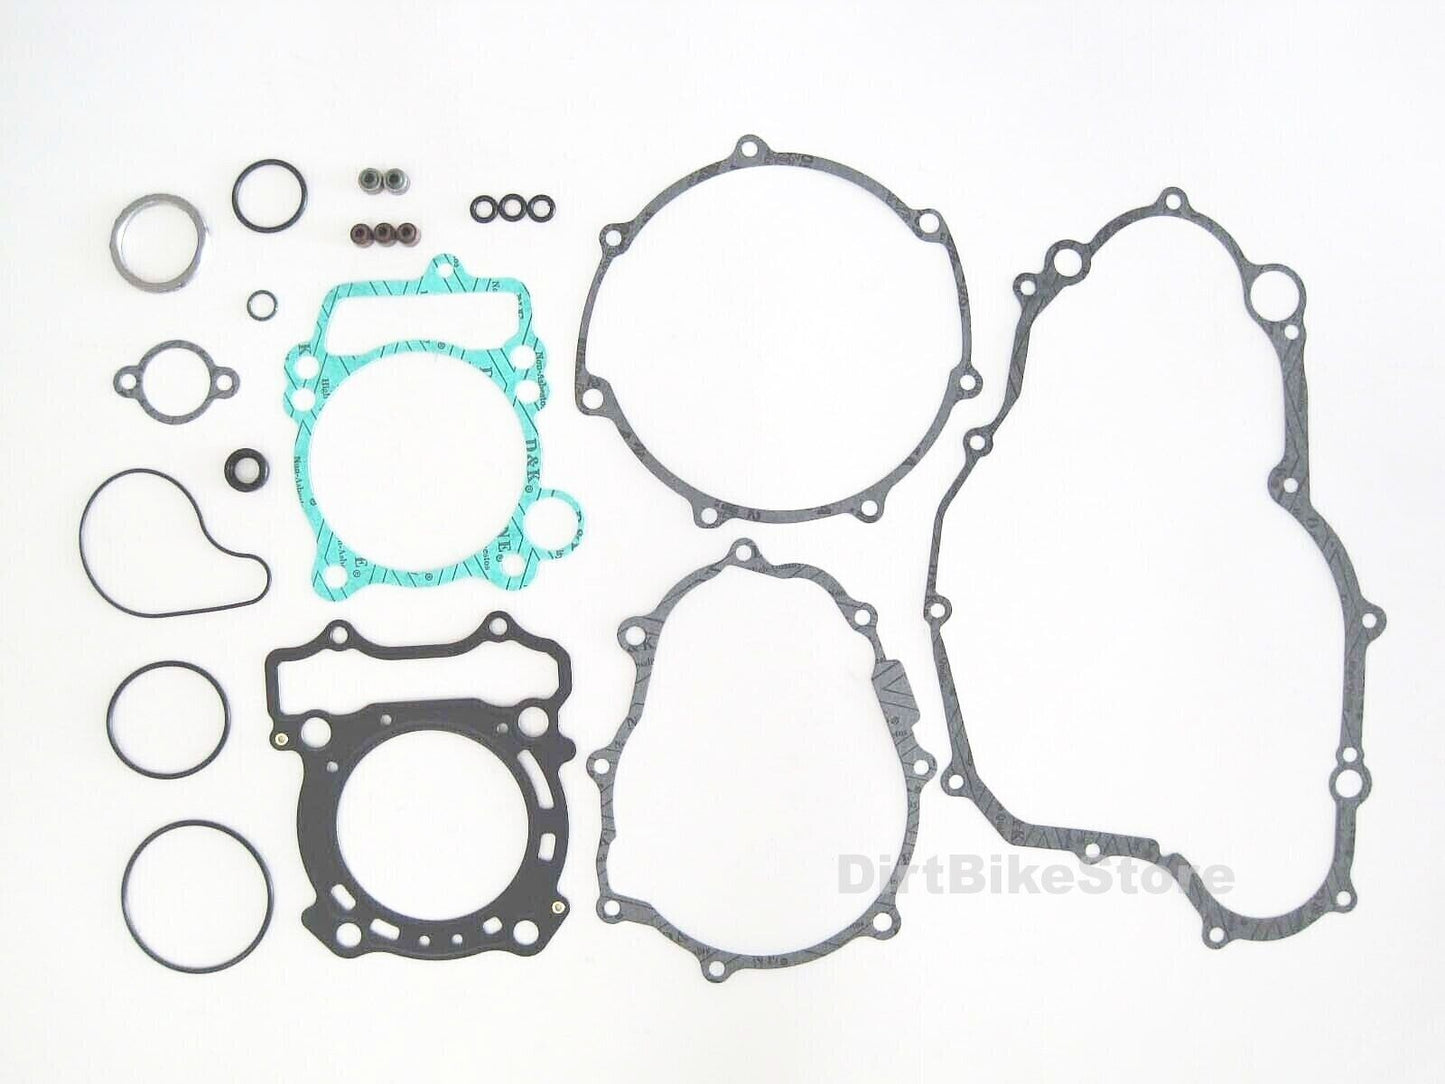 Yamaha YZ YZF 250 F (2003-2013) FULL COMPLETE Engine Gasket Set With Valve Seals